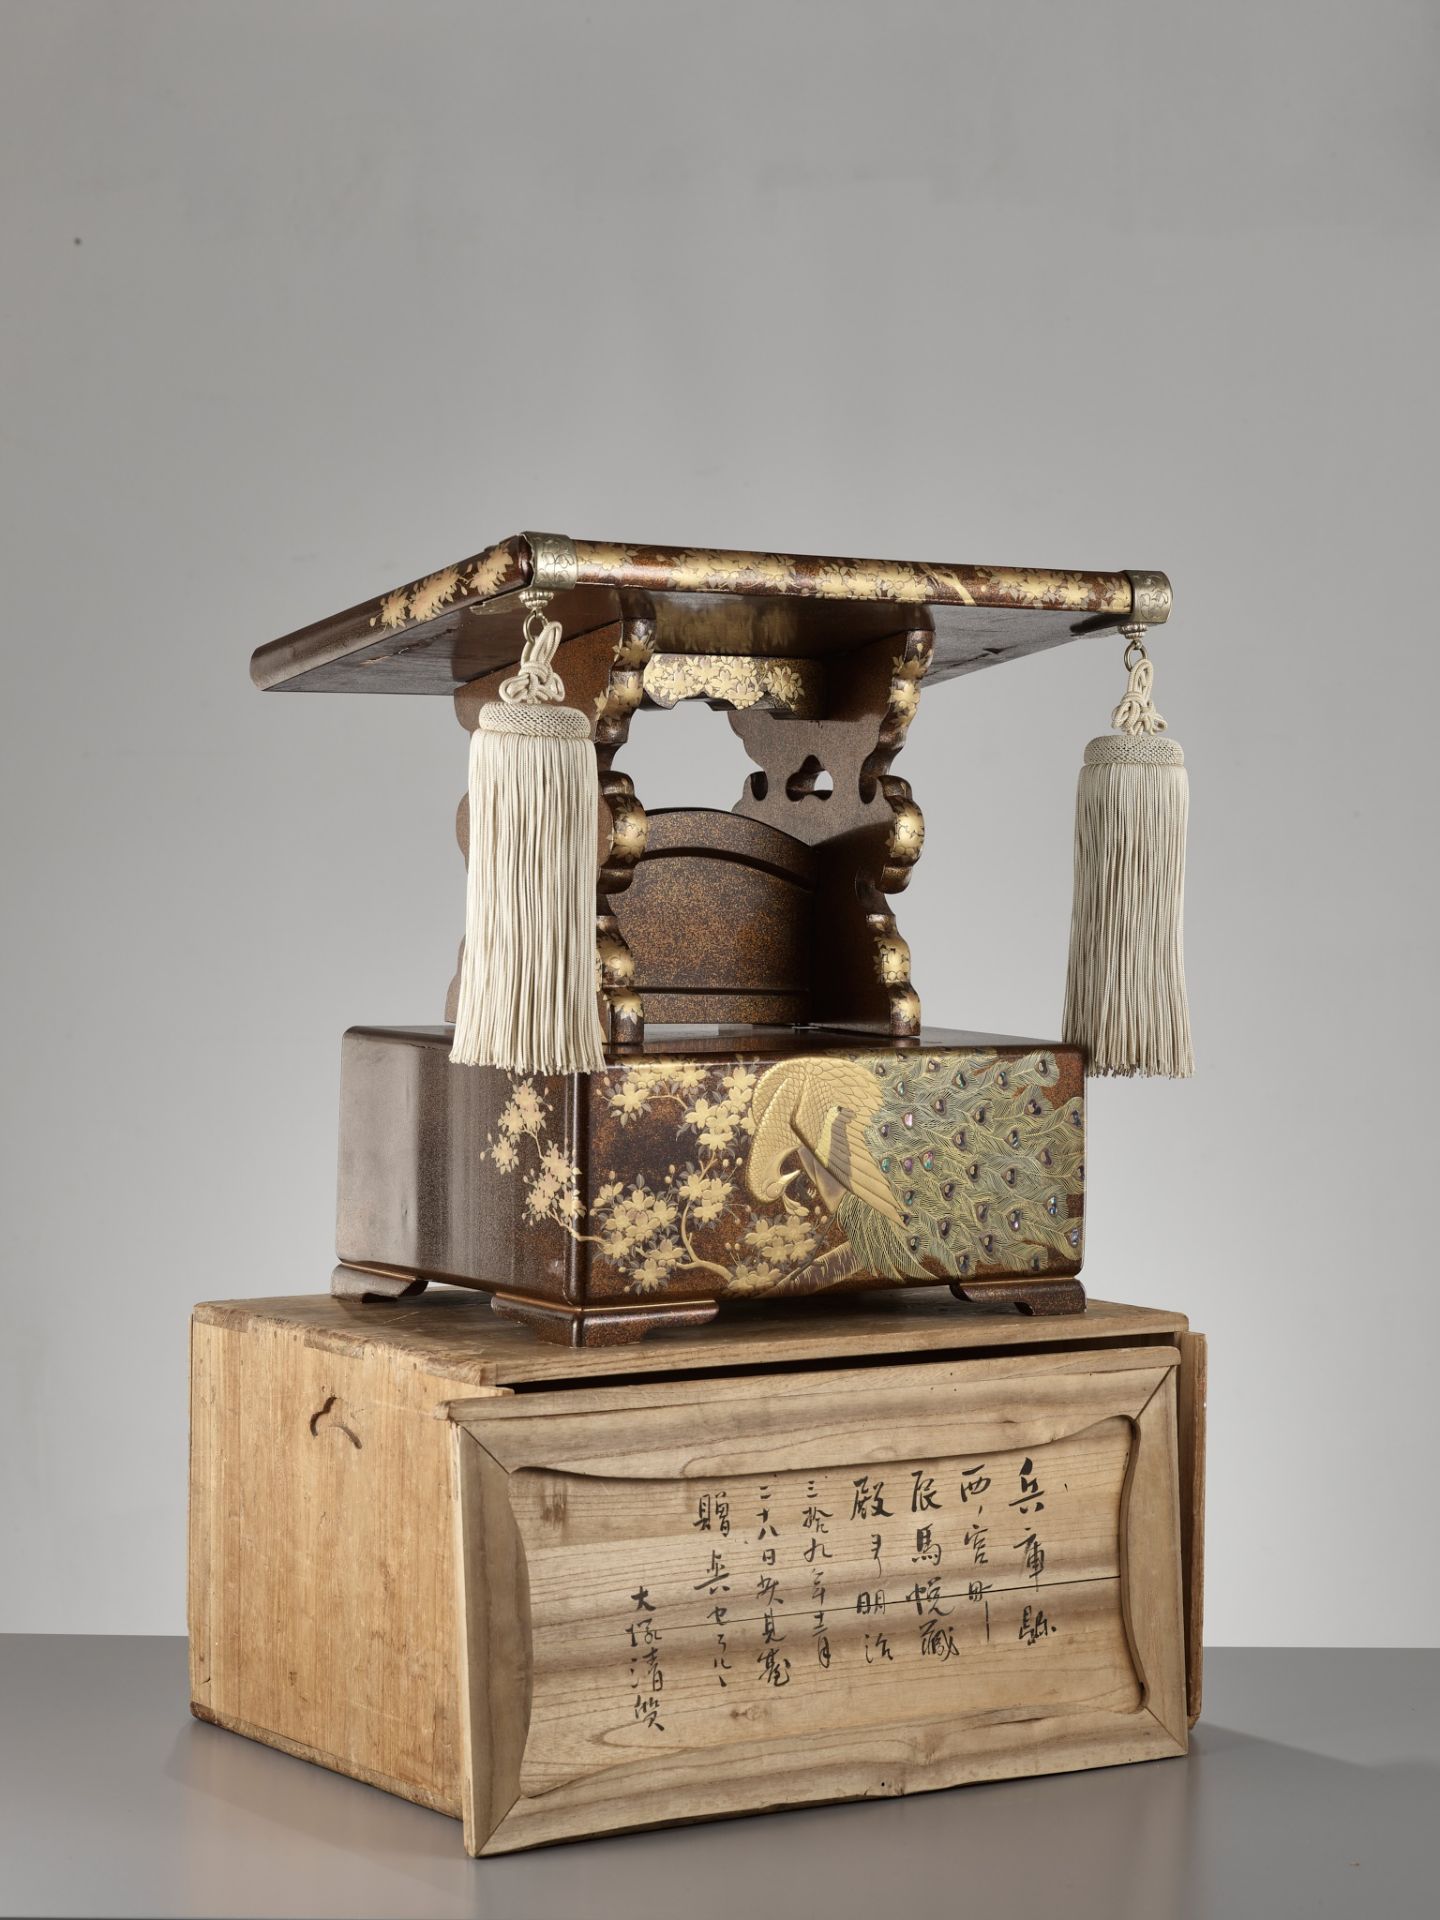 A RARE LACQUER KENDAI (LECTERN) - Image 3 of 12